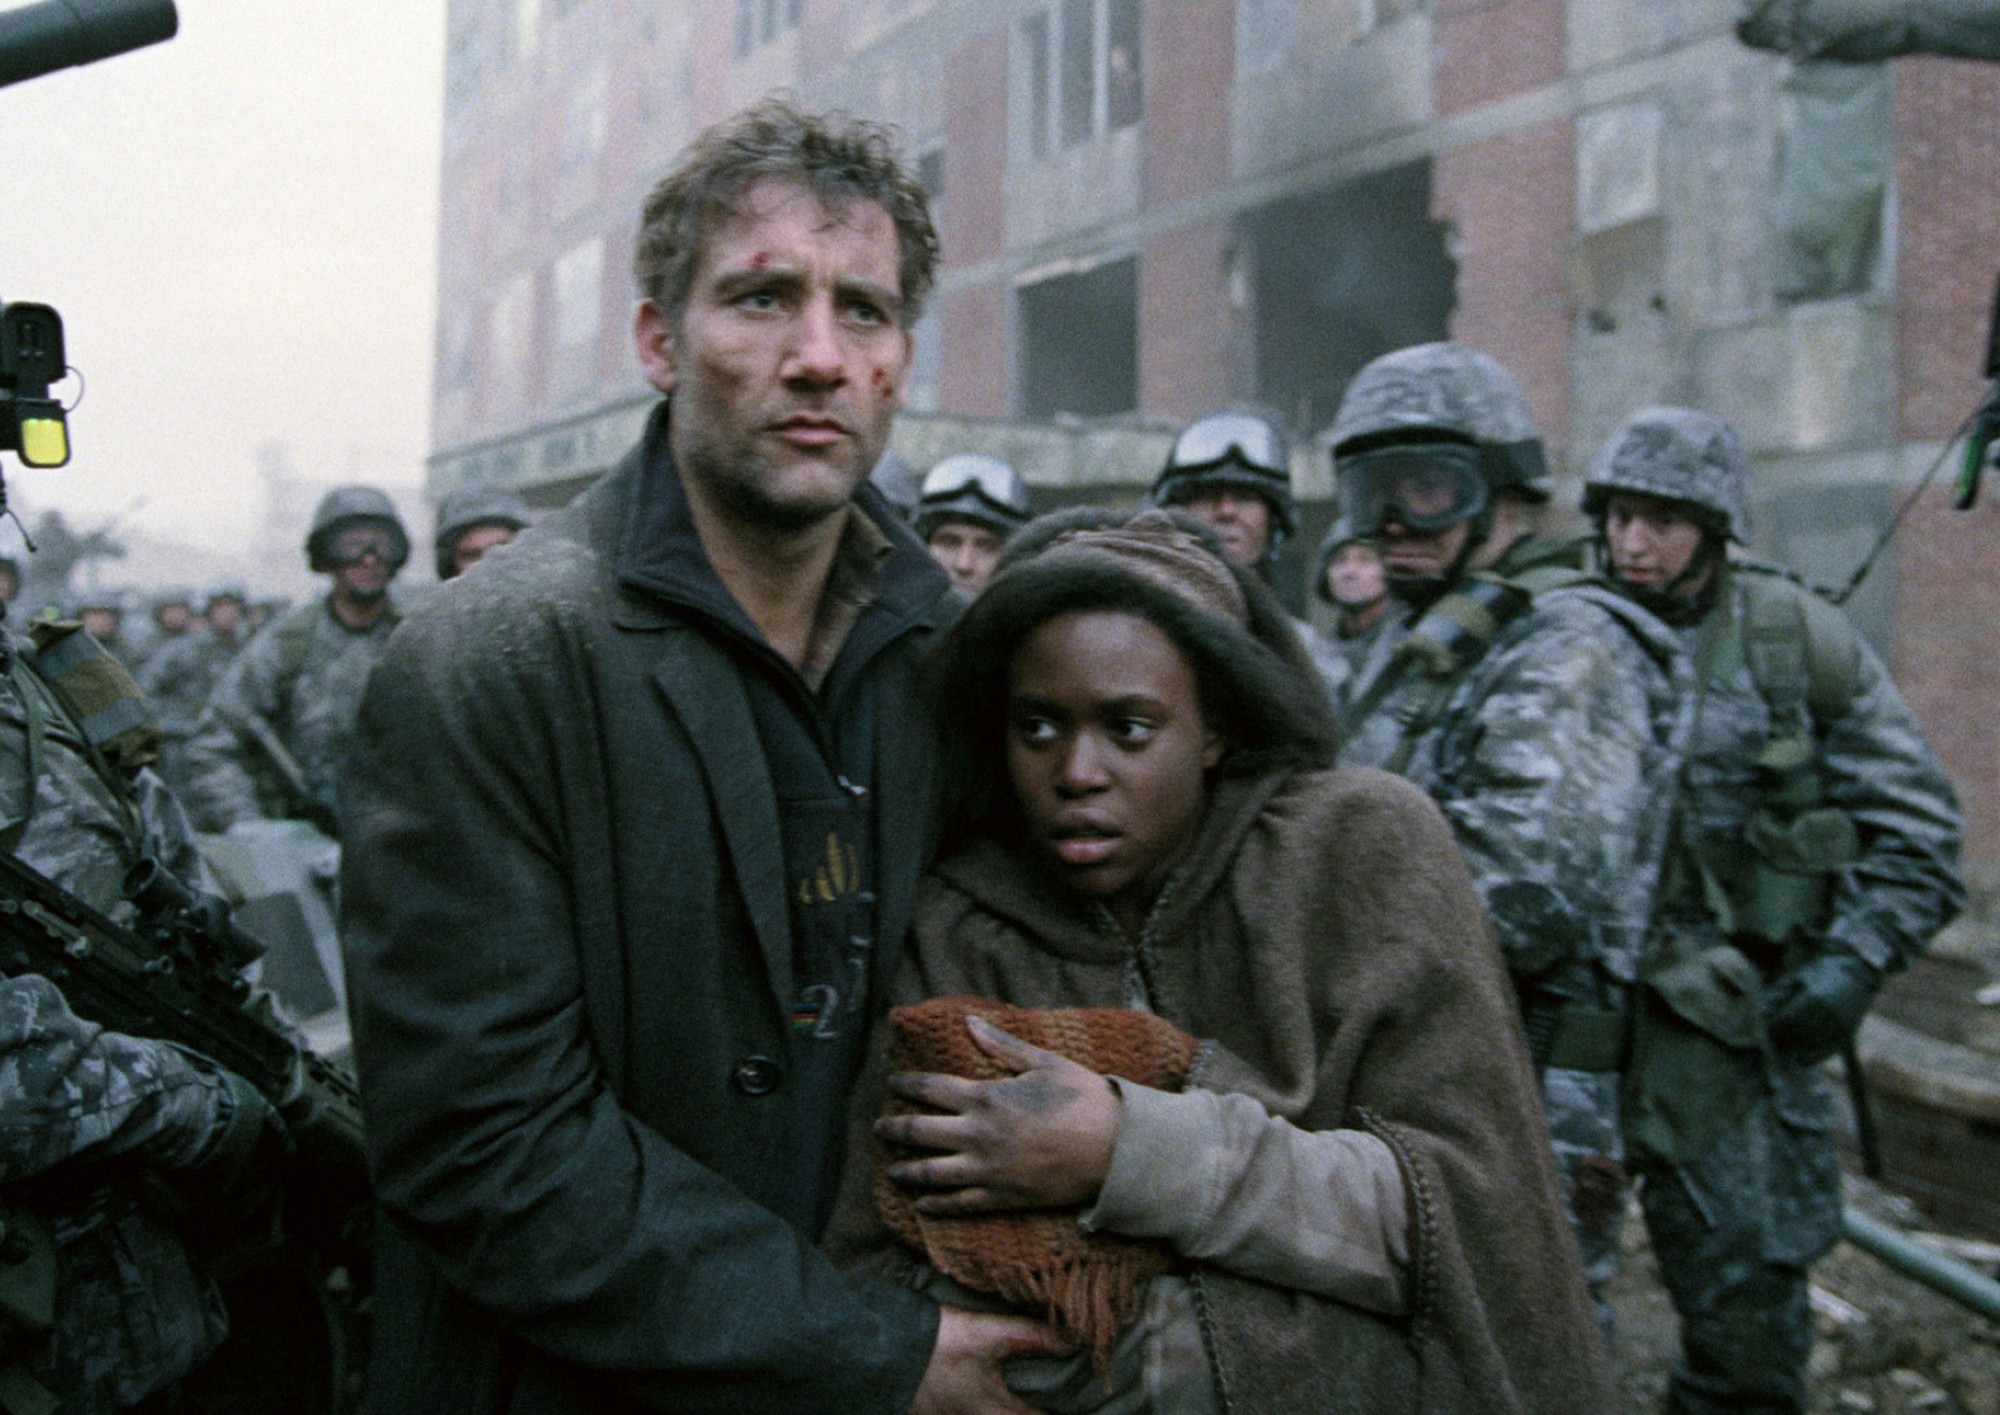 Image from the motion picture Children of Men